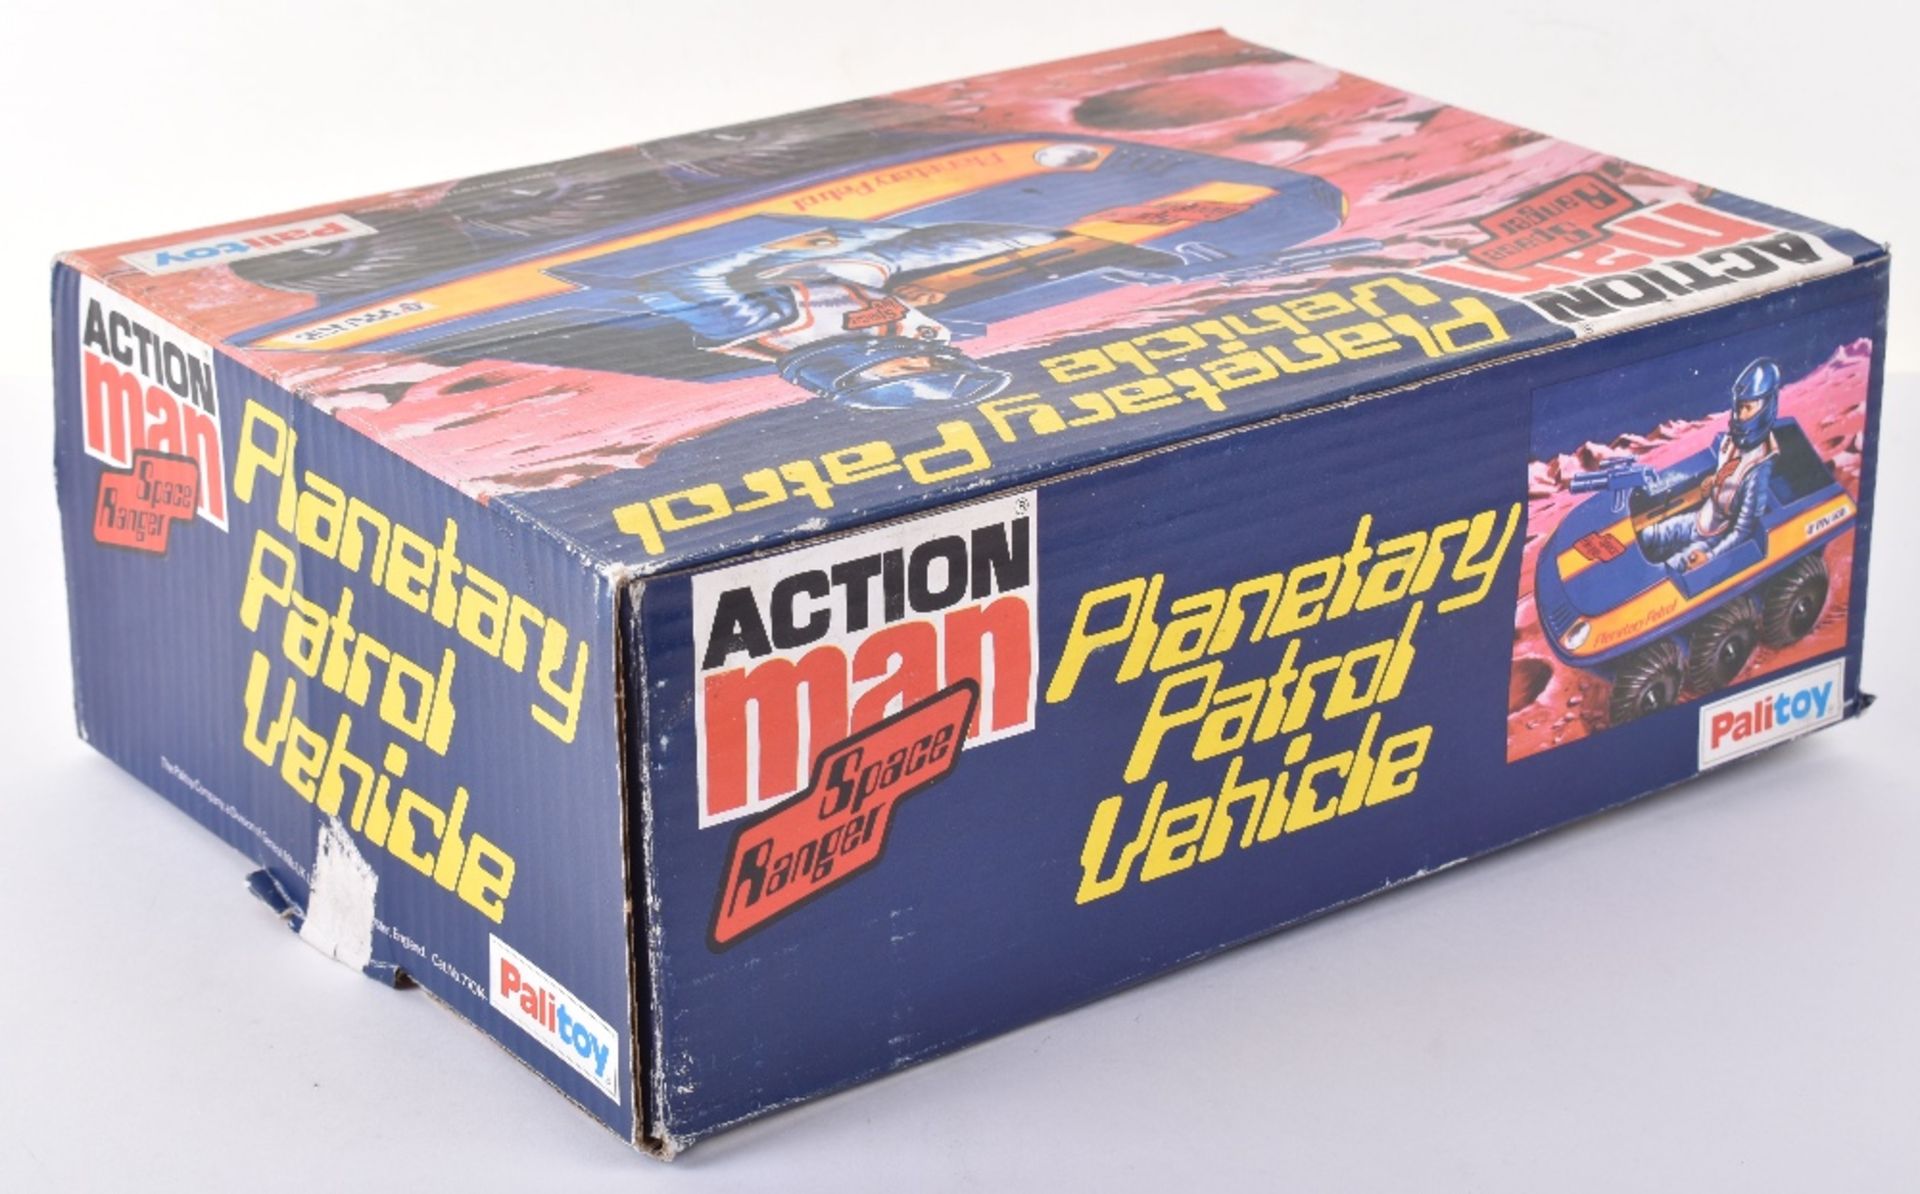 Scarce Boxed Action Man Space Ranger Planetary Patrol Vehicle - Image 4 of 4